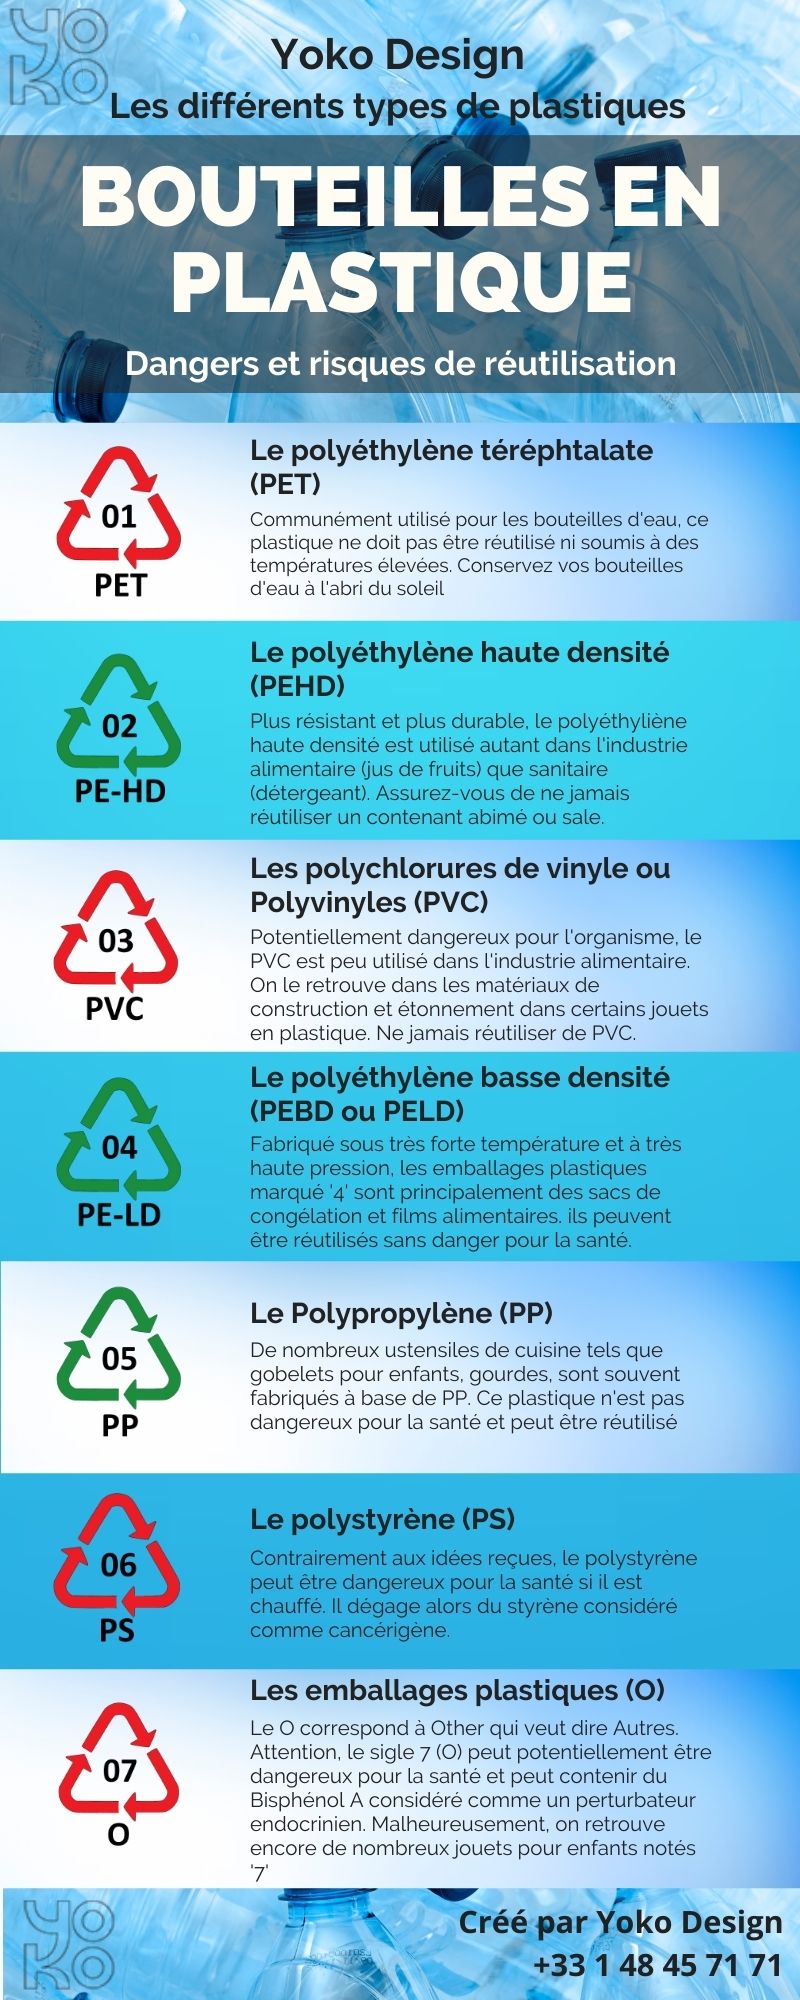 Infography of plastic codification and health risks